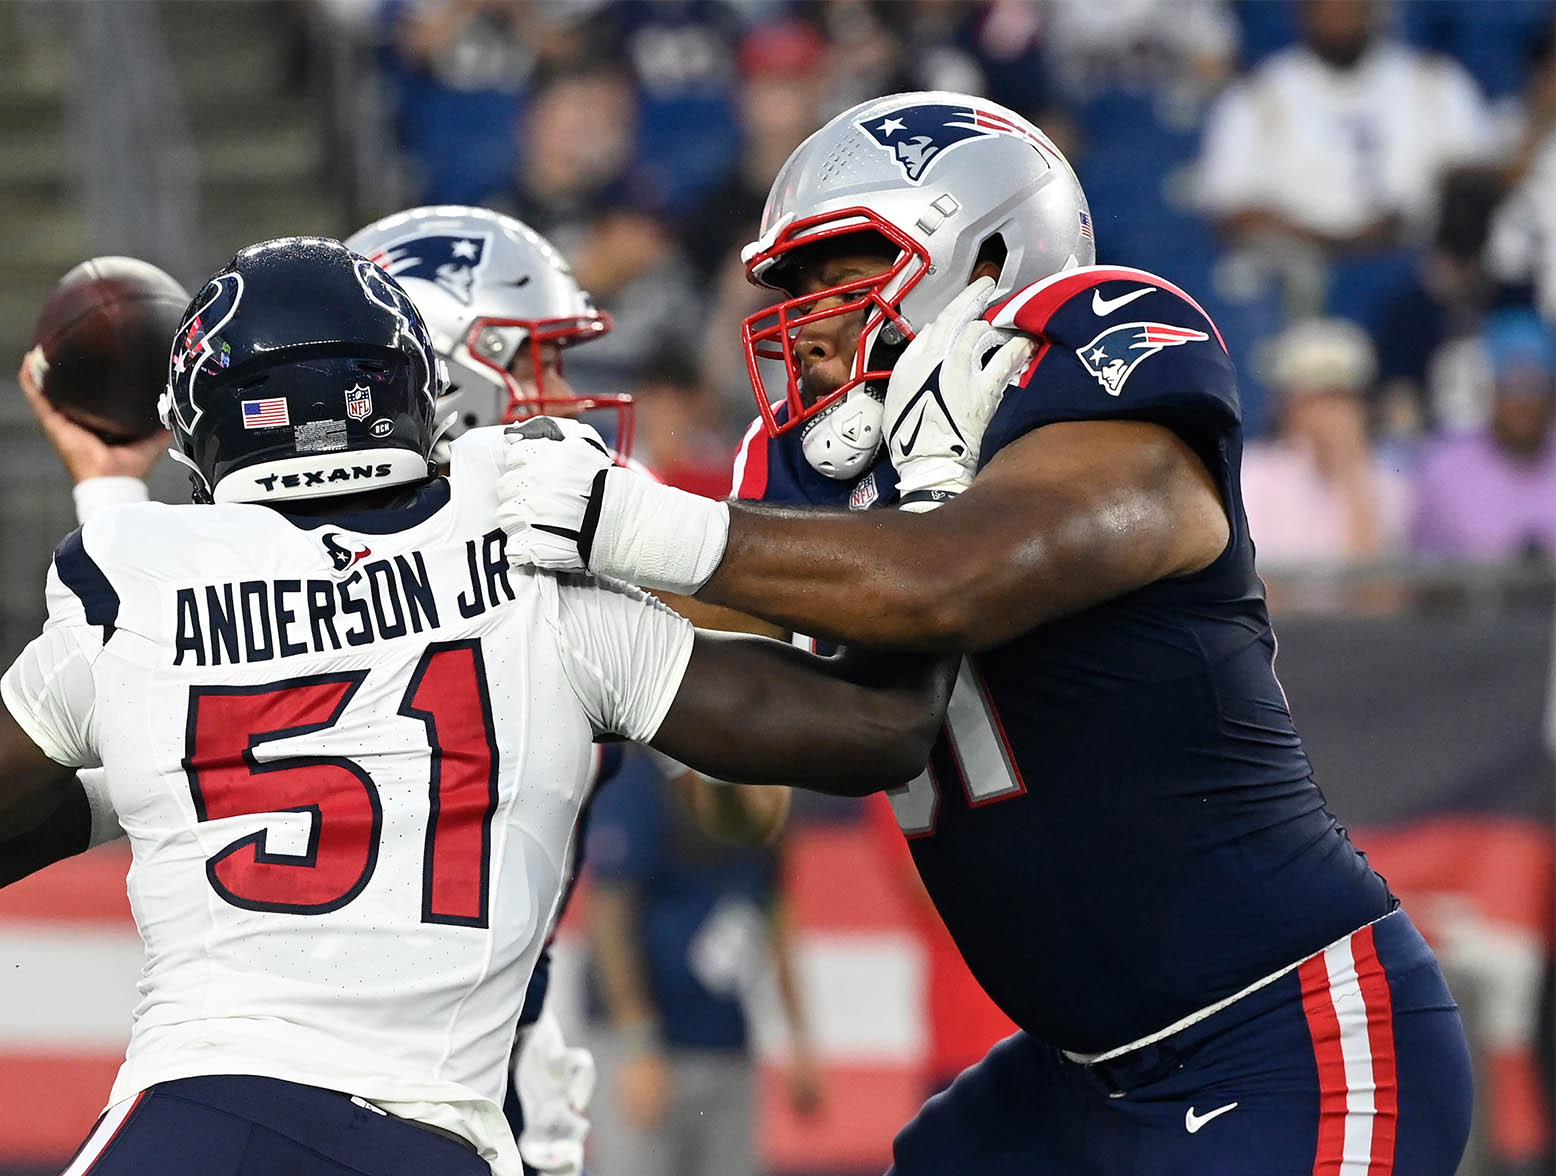 Aug 10, 2023; Foxborough, Massachusetts, USA; New England Patriots guard Sidy Sow (61) blocks Houston Texans defensive end Will Anderson Jr. (51) away from quarterback Bailey Zappe (4) during the first half at Gillette Stadium. Mandatory Credit: Eric Canha-USA TODAY Sports